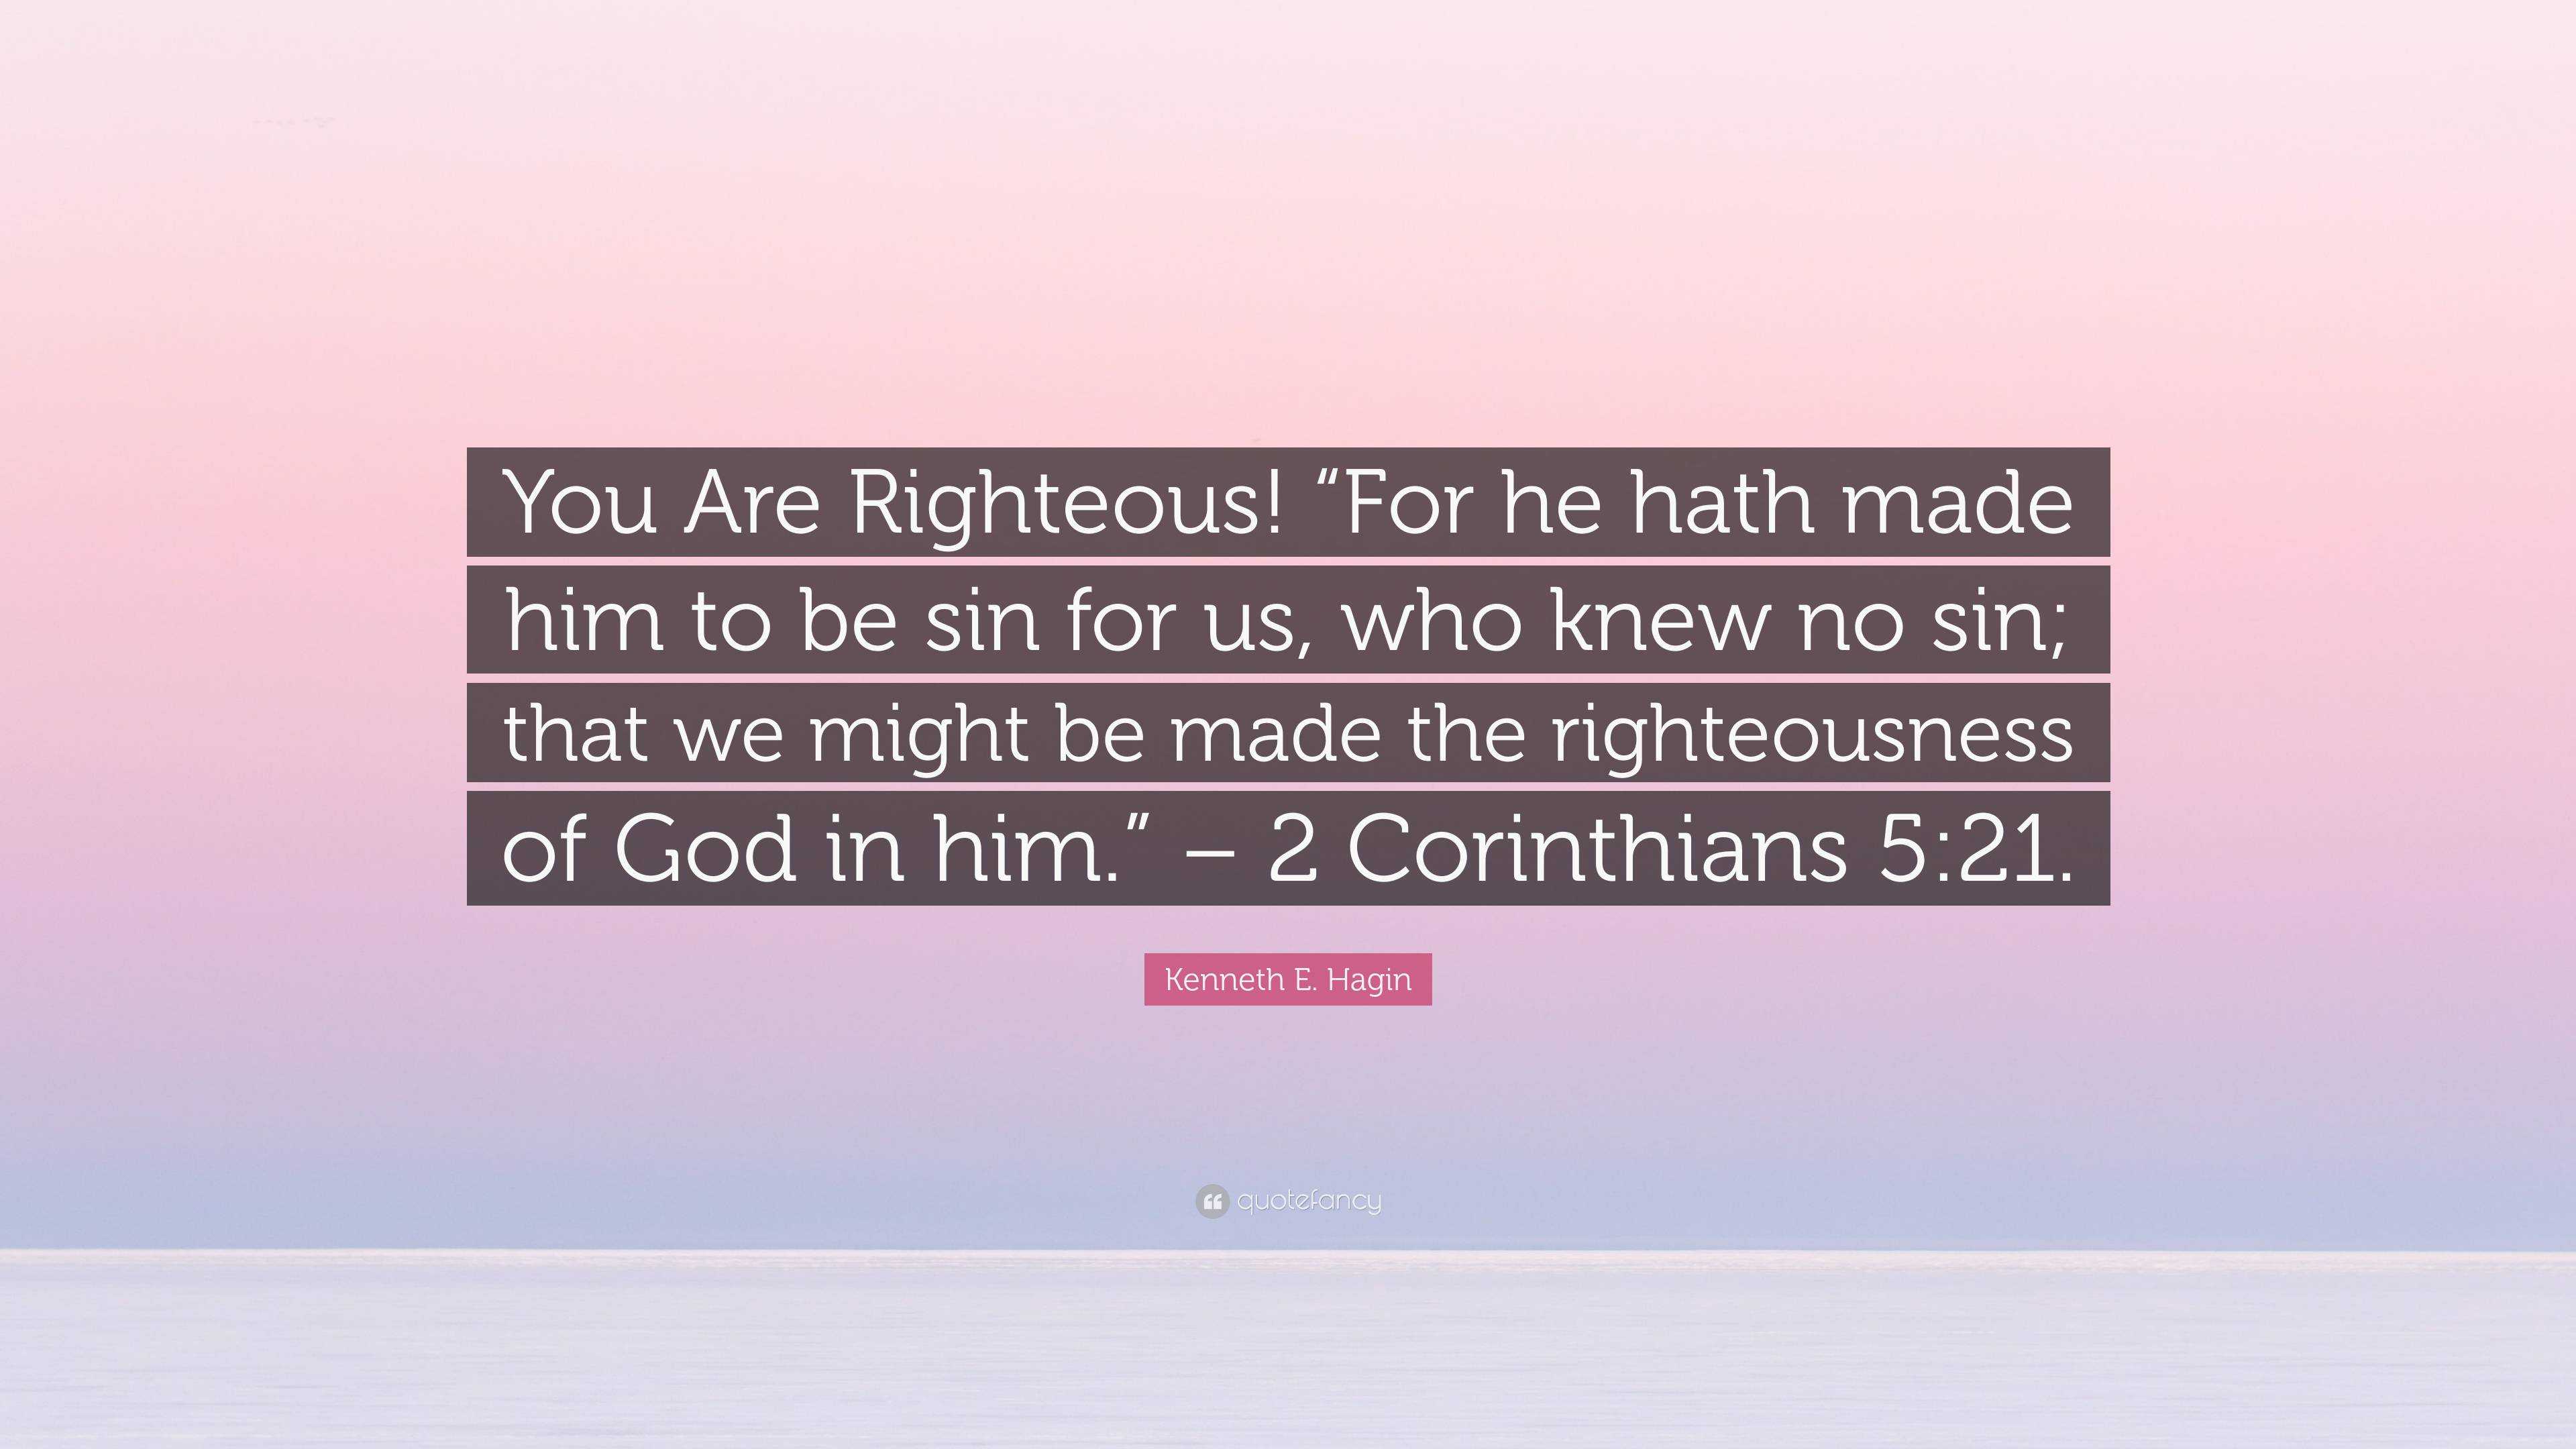 Kenneth E. Hagin Quote: “You Are Righteous! “For he hath made him to be sin  for us